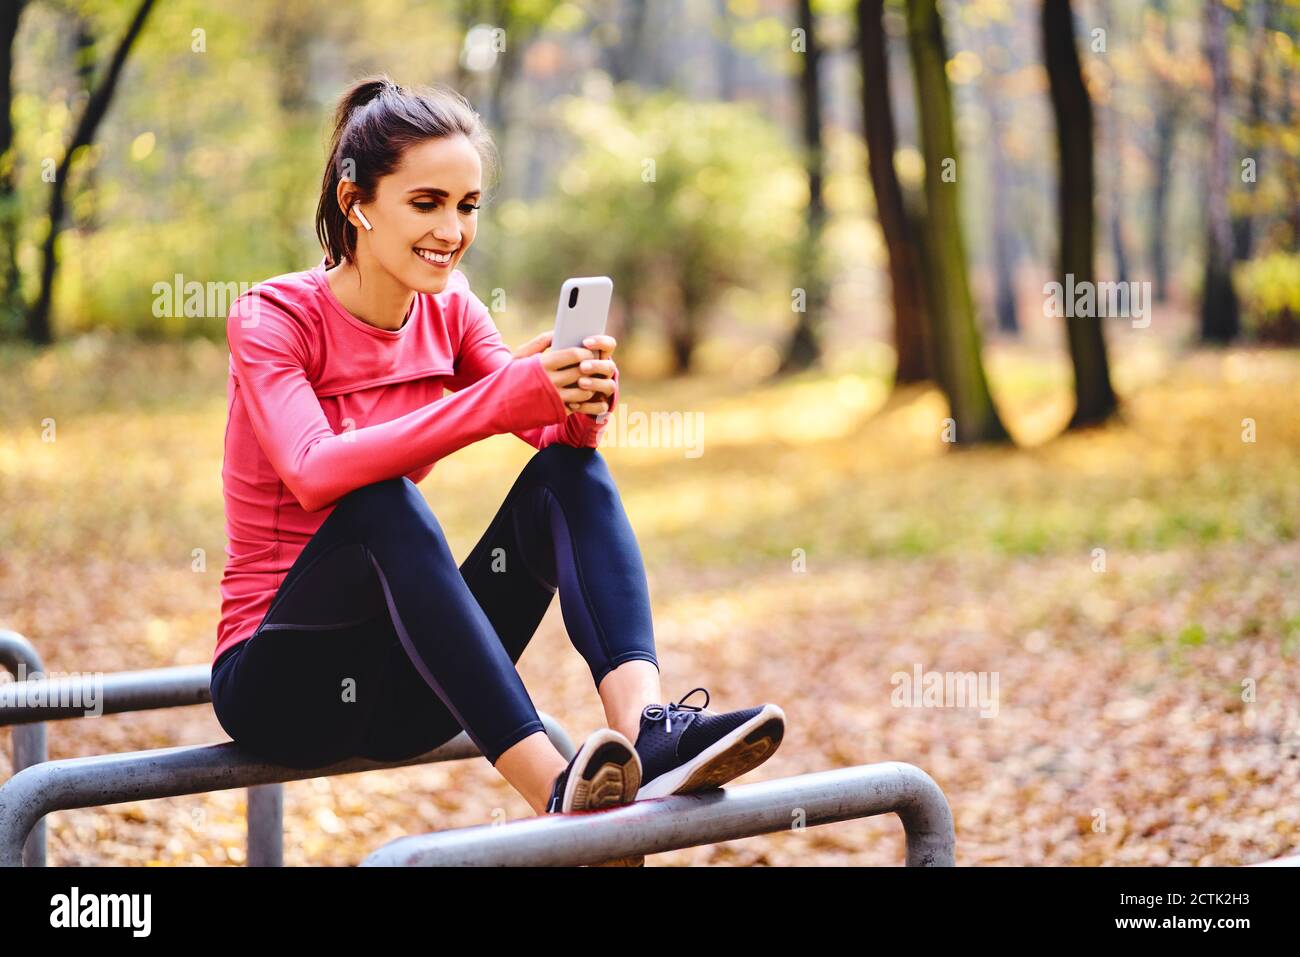 Young female jogger using smartphoneon sitting on bicycle stand in autumn forest Stock Photo